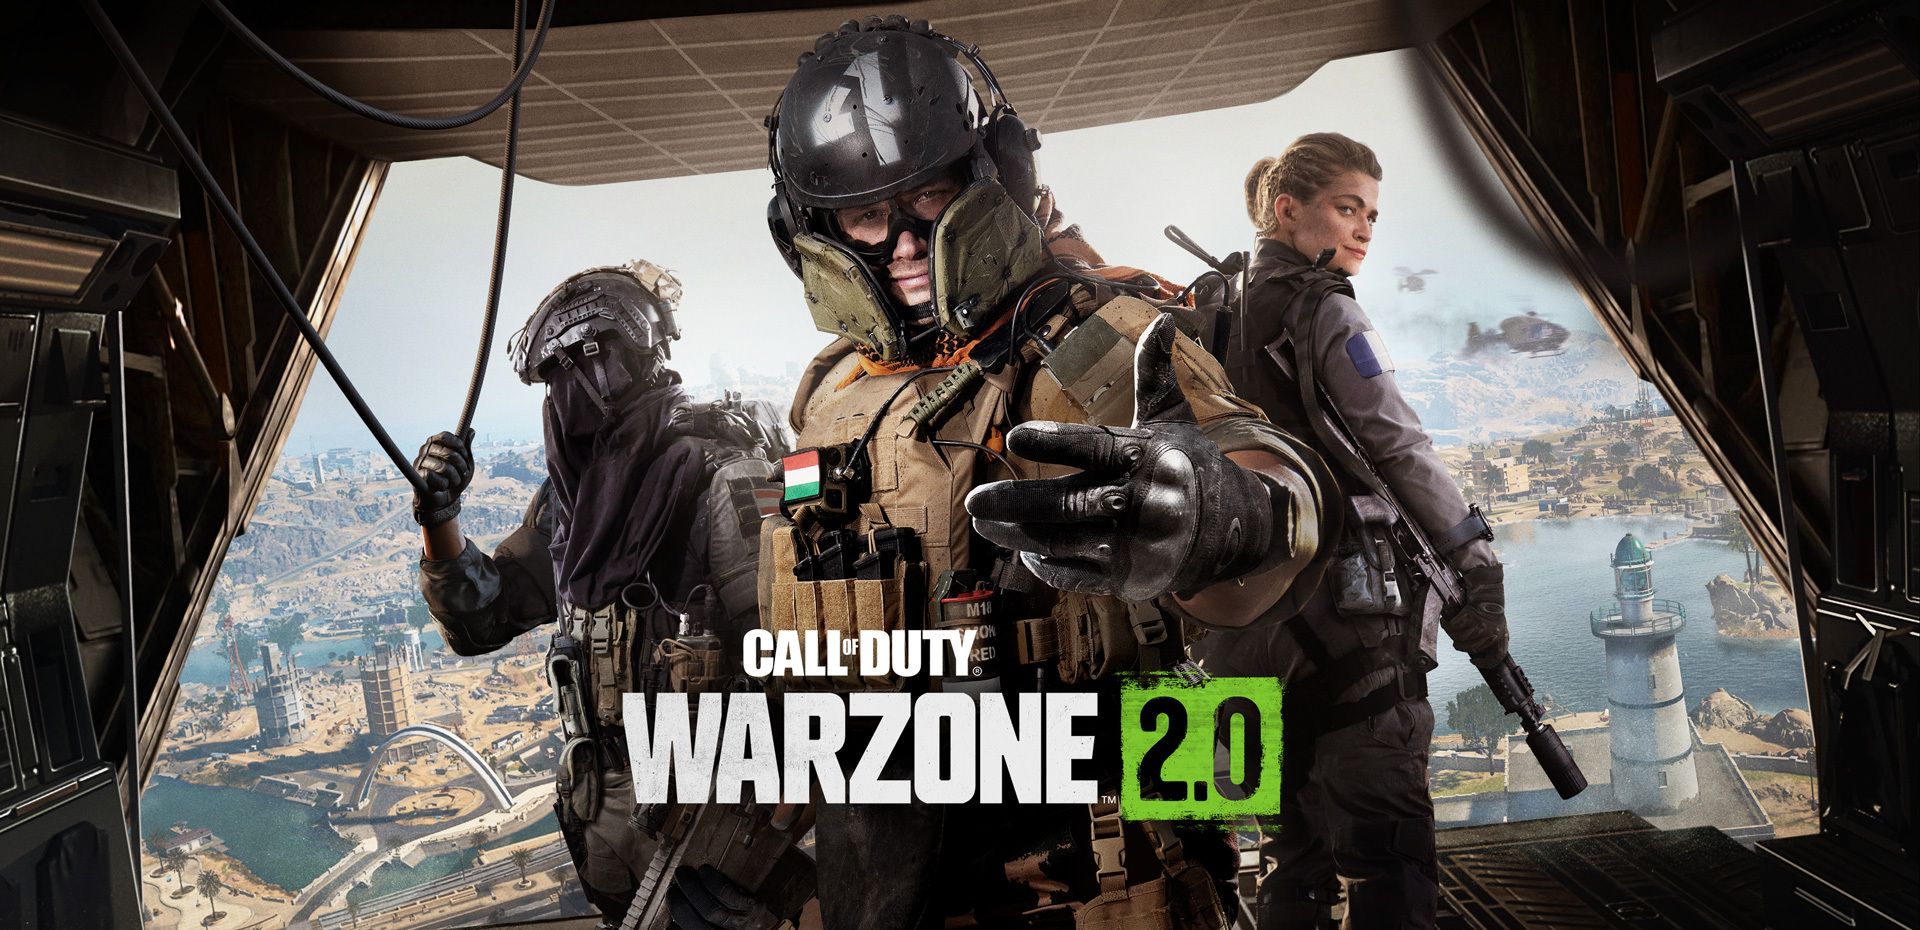 In this article, we are going to be covering why Warzone 2.0 laggy and how to fix Warzone 2.0 lagging error, so you can enjoy the game without any issues.